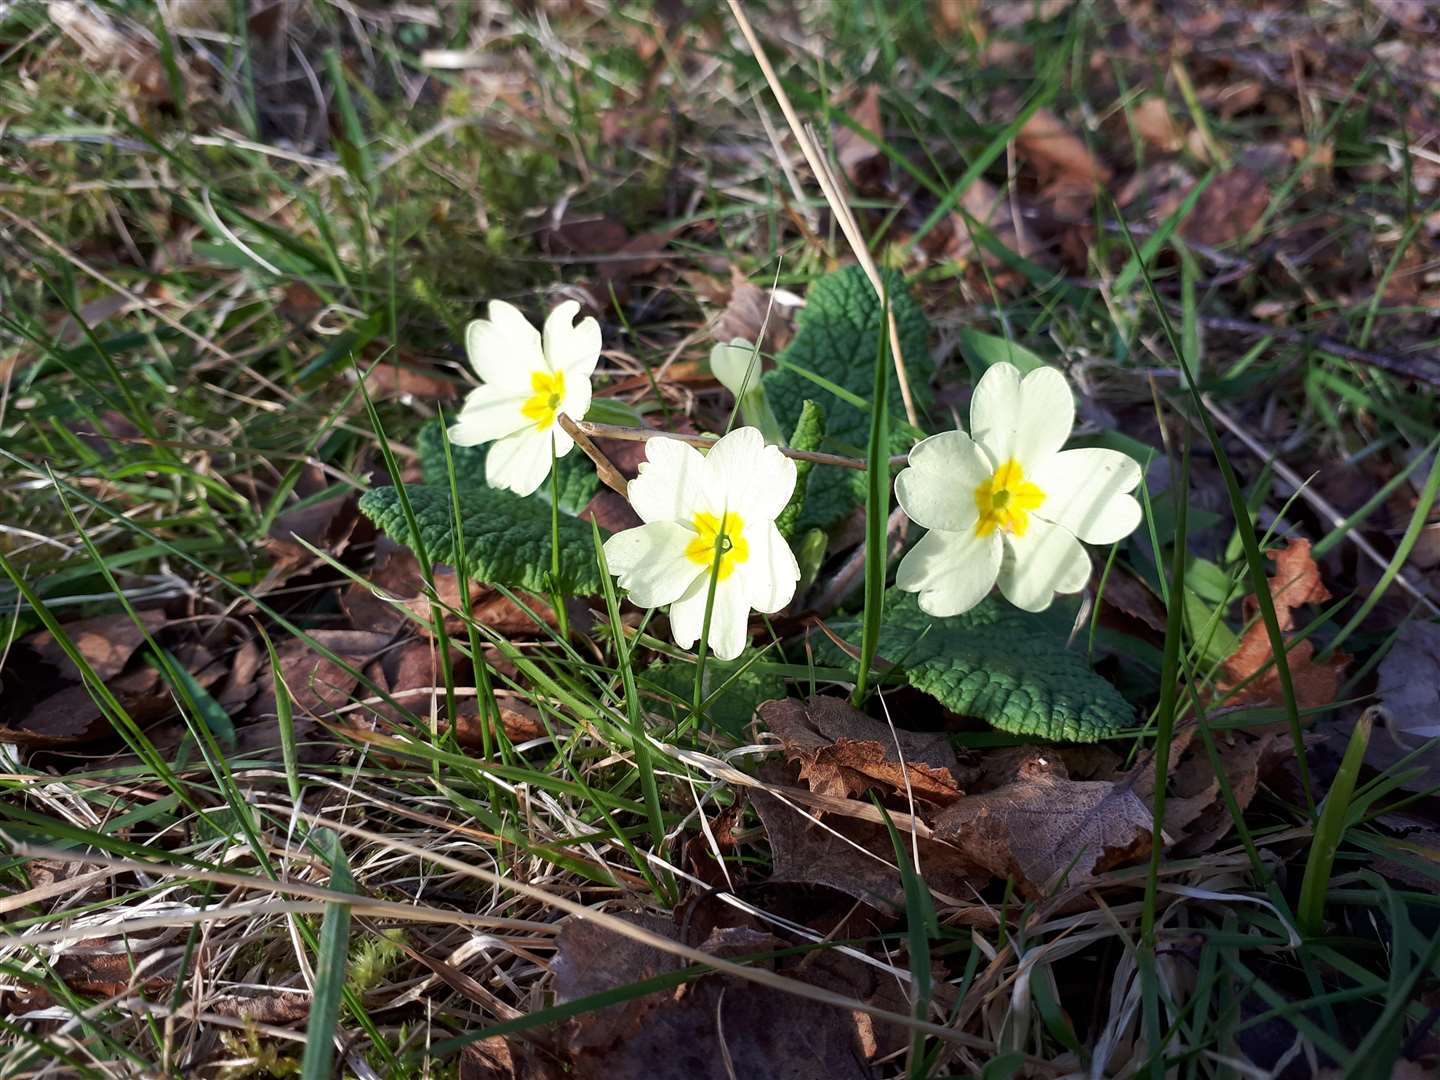 Primroses can really brighten your day.